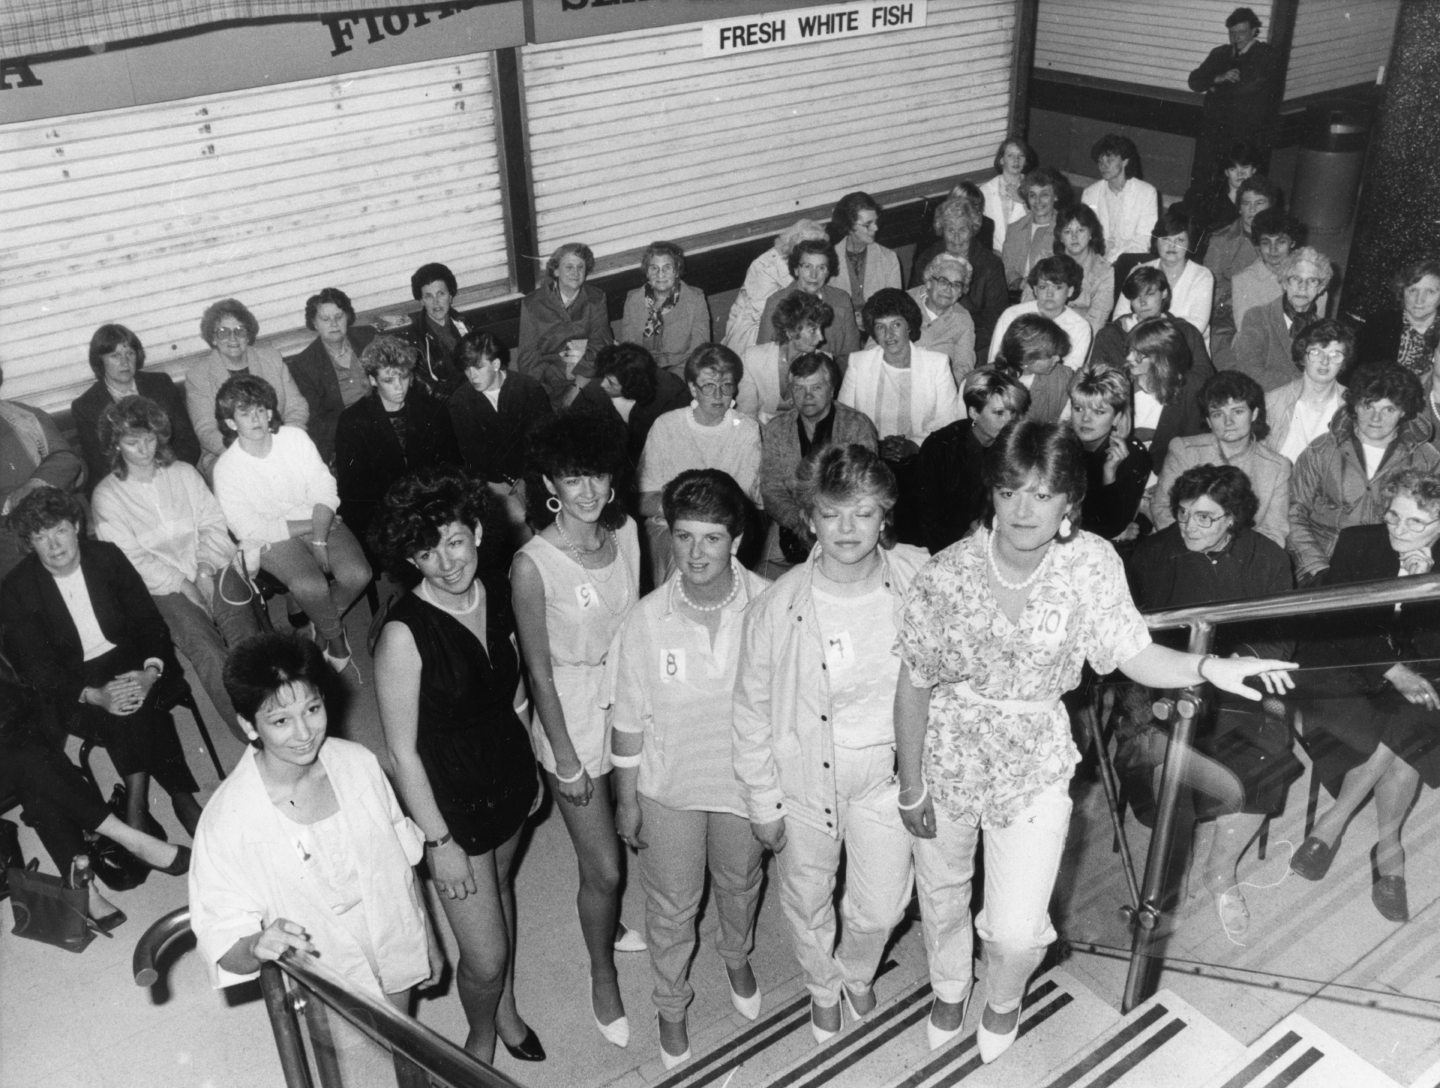 Aberdeen New Market annual summer fashion show in 1985 raised money for victims of the Bradford stadium disaster.